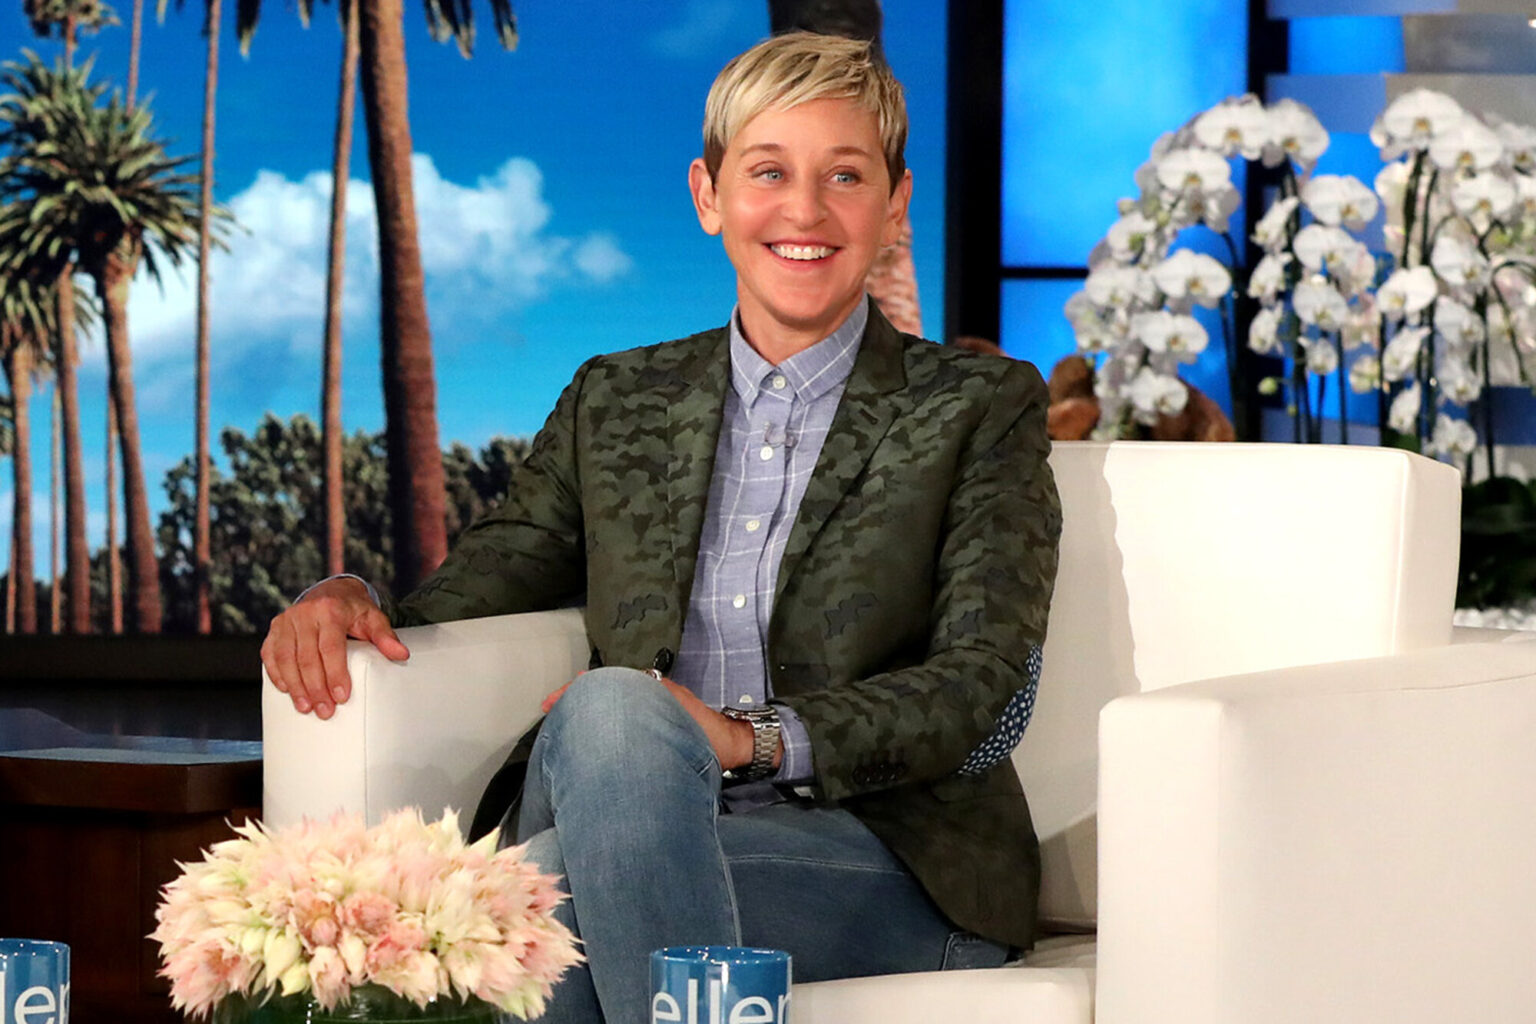 'The Ellen DeGeneres Show' has seen a tumultuous year. Is the show really toxic? Let's take a look at the accusations.